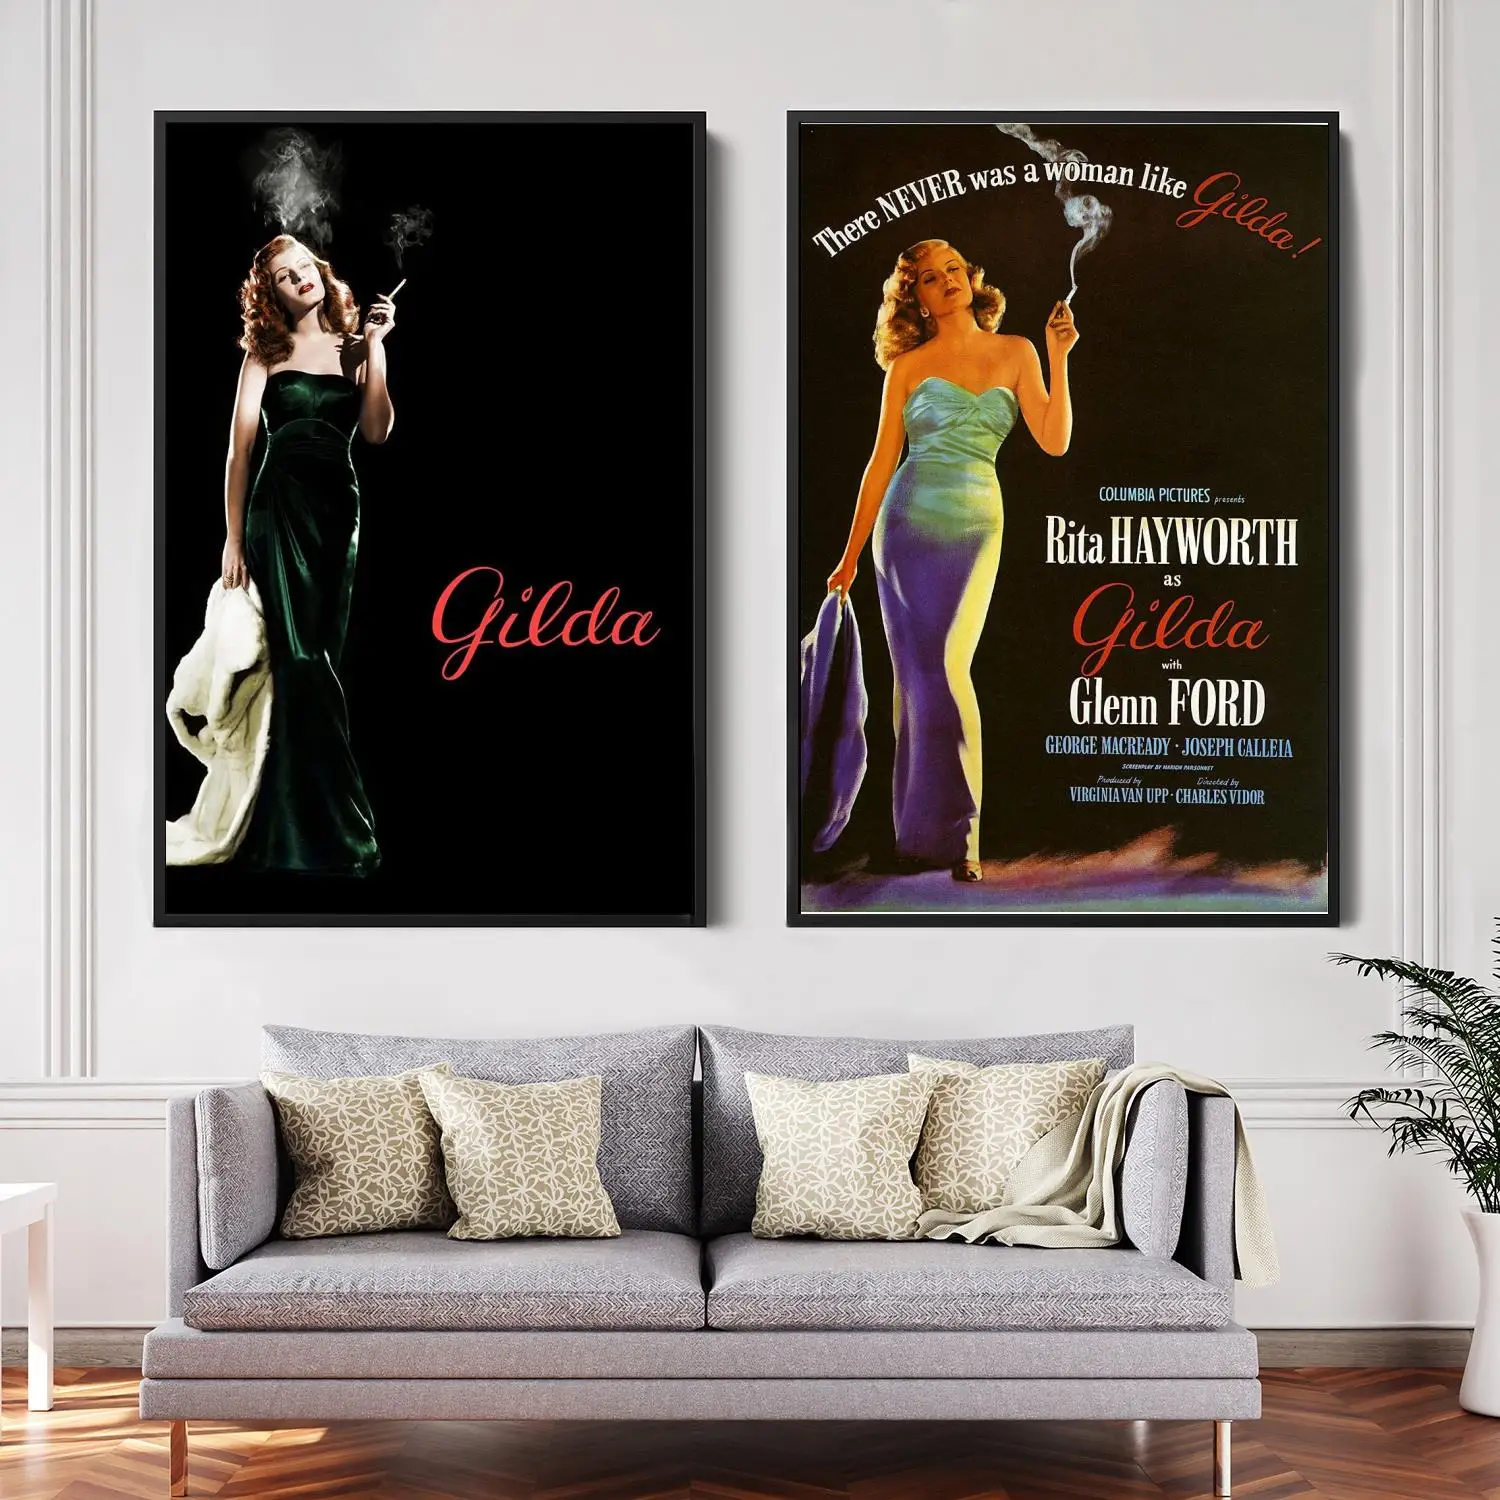 

rita hayworth Actor Decorative Canvas Posters Room Bar Cafe Decor Gift Print Art Wall Paintings